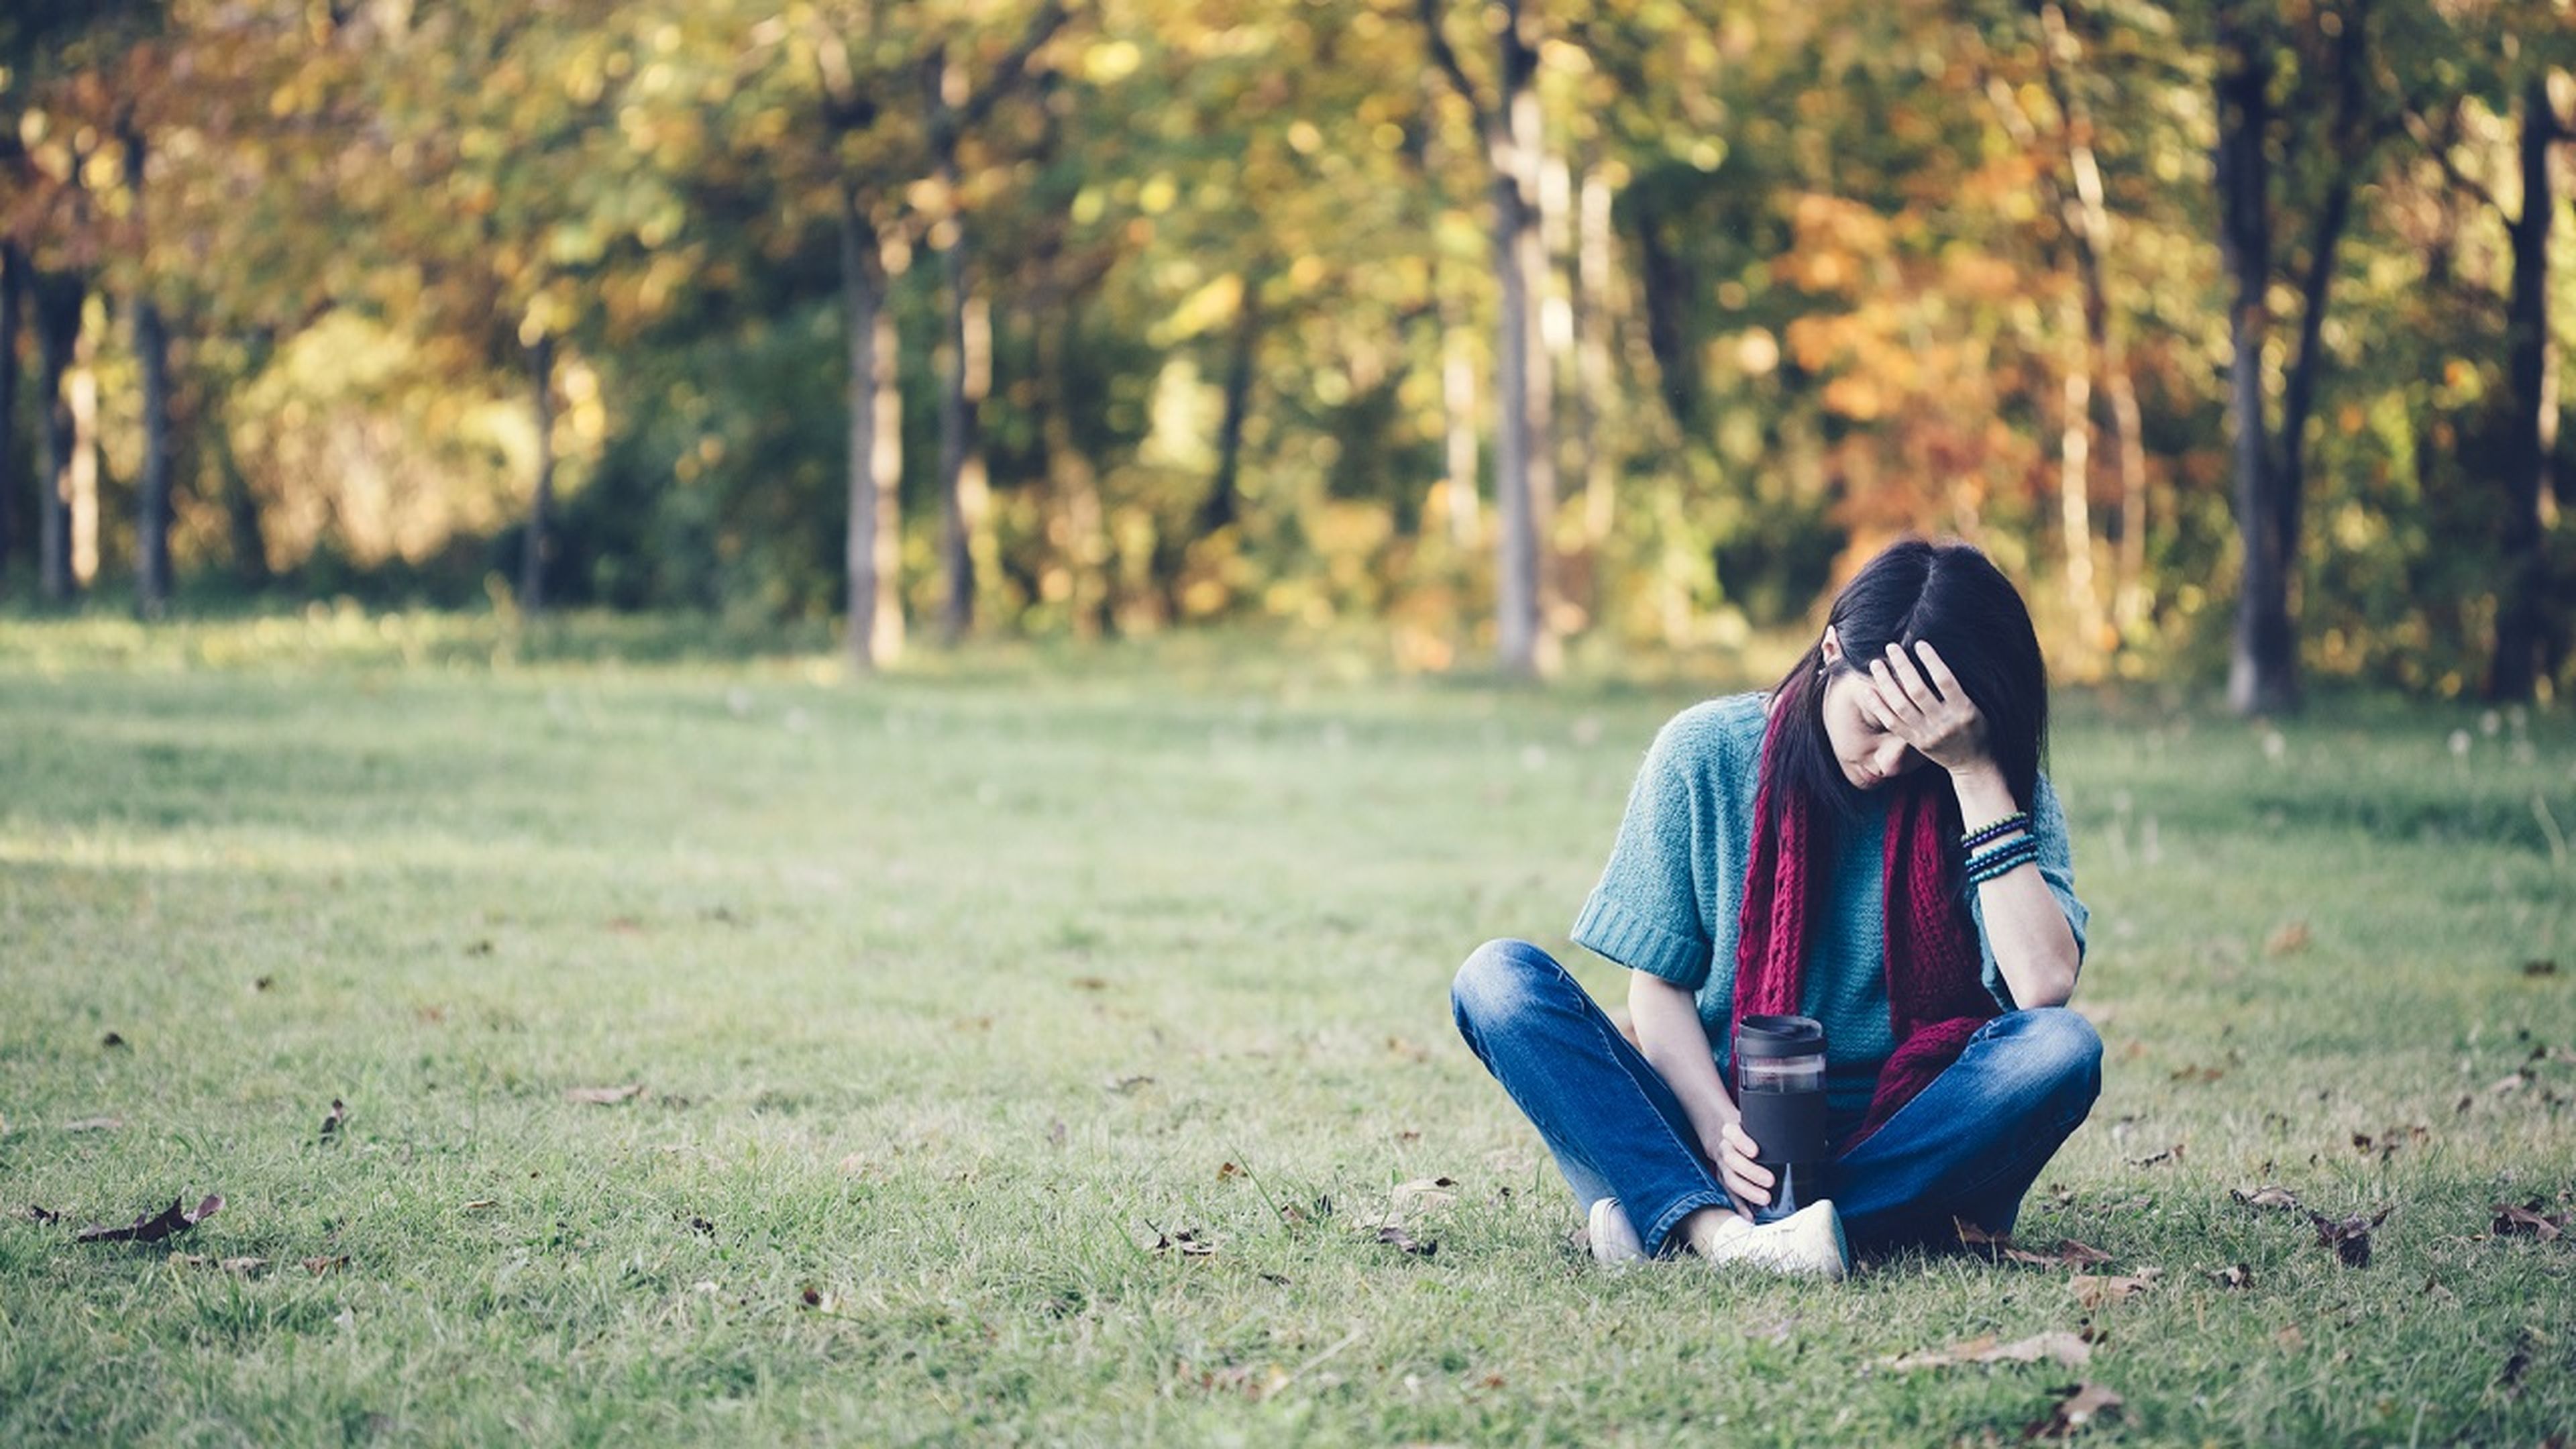 Seasonal affective disorder: this is how science explains being down in the fall